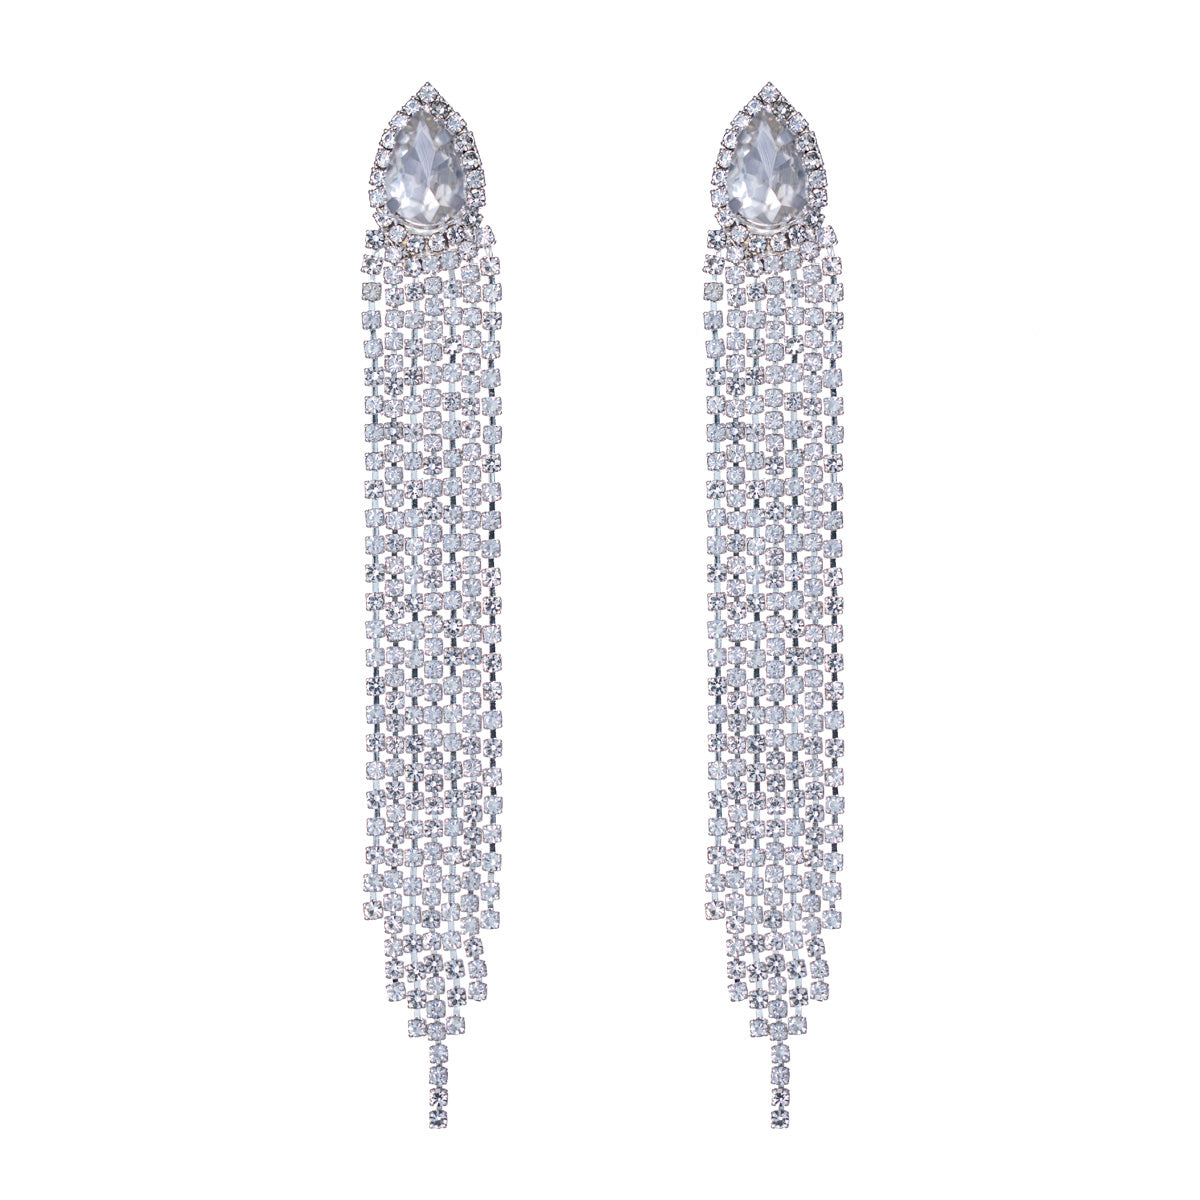 Long party earrings with hanging rhinestones